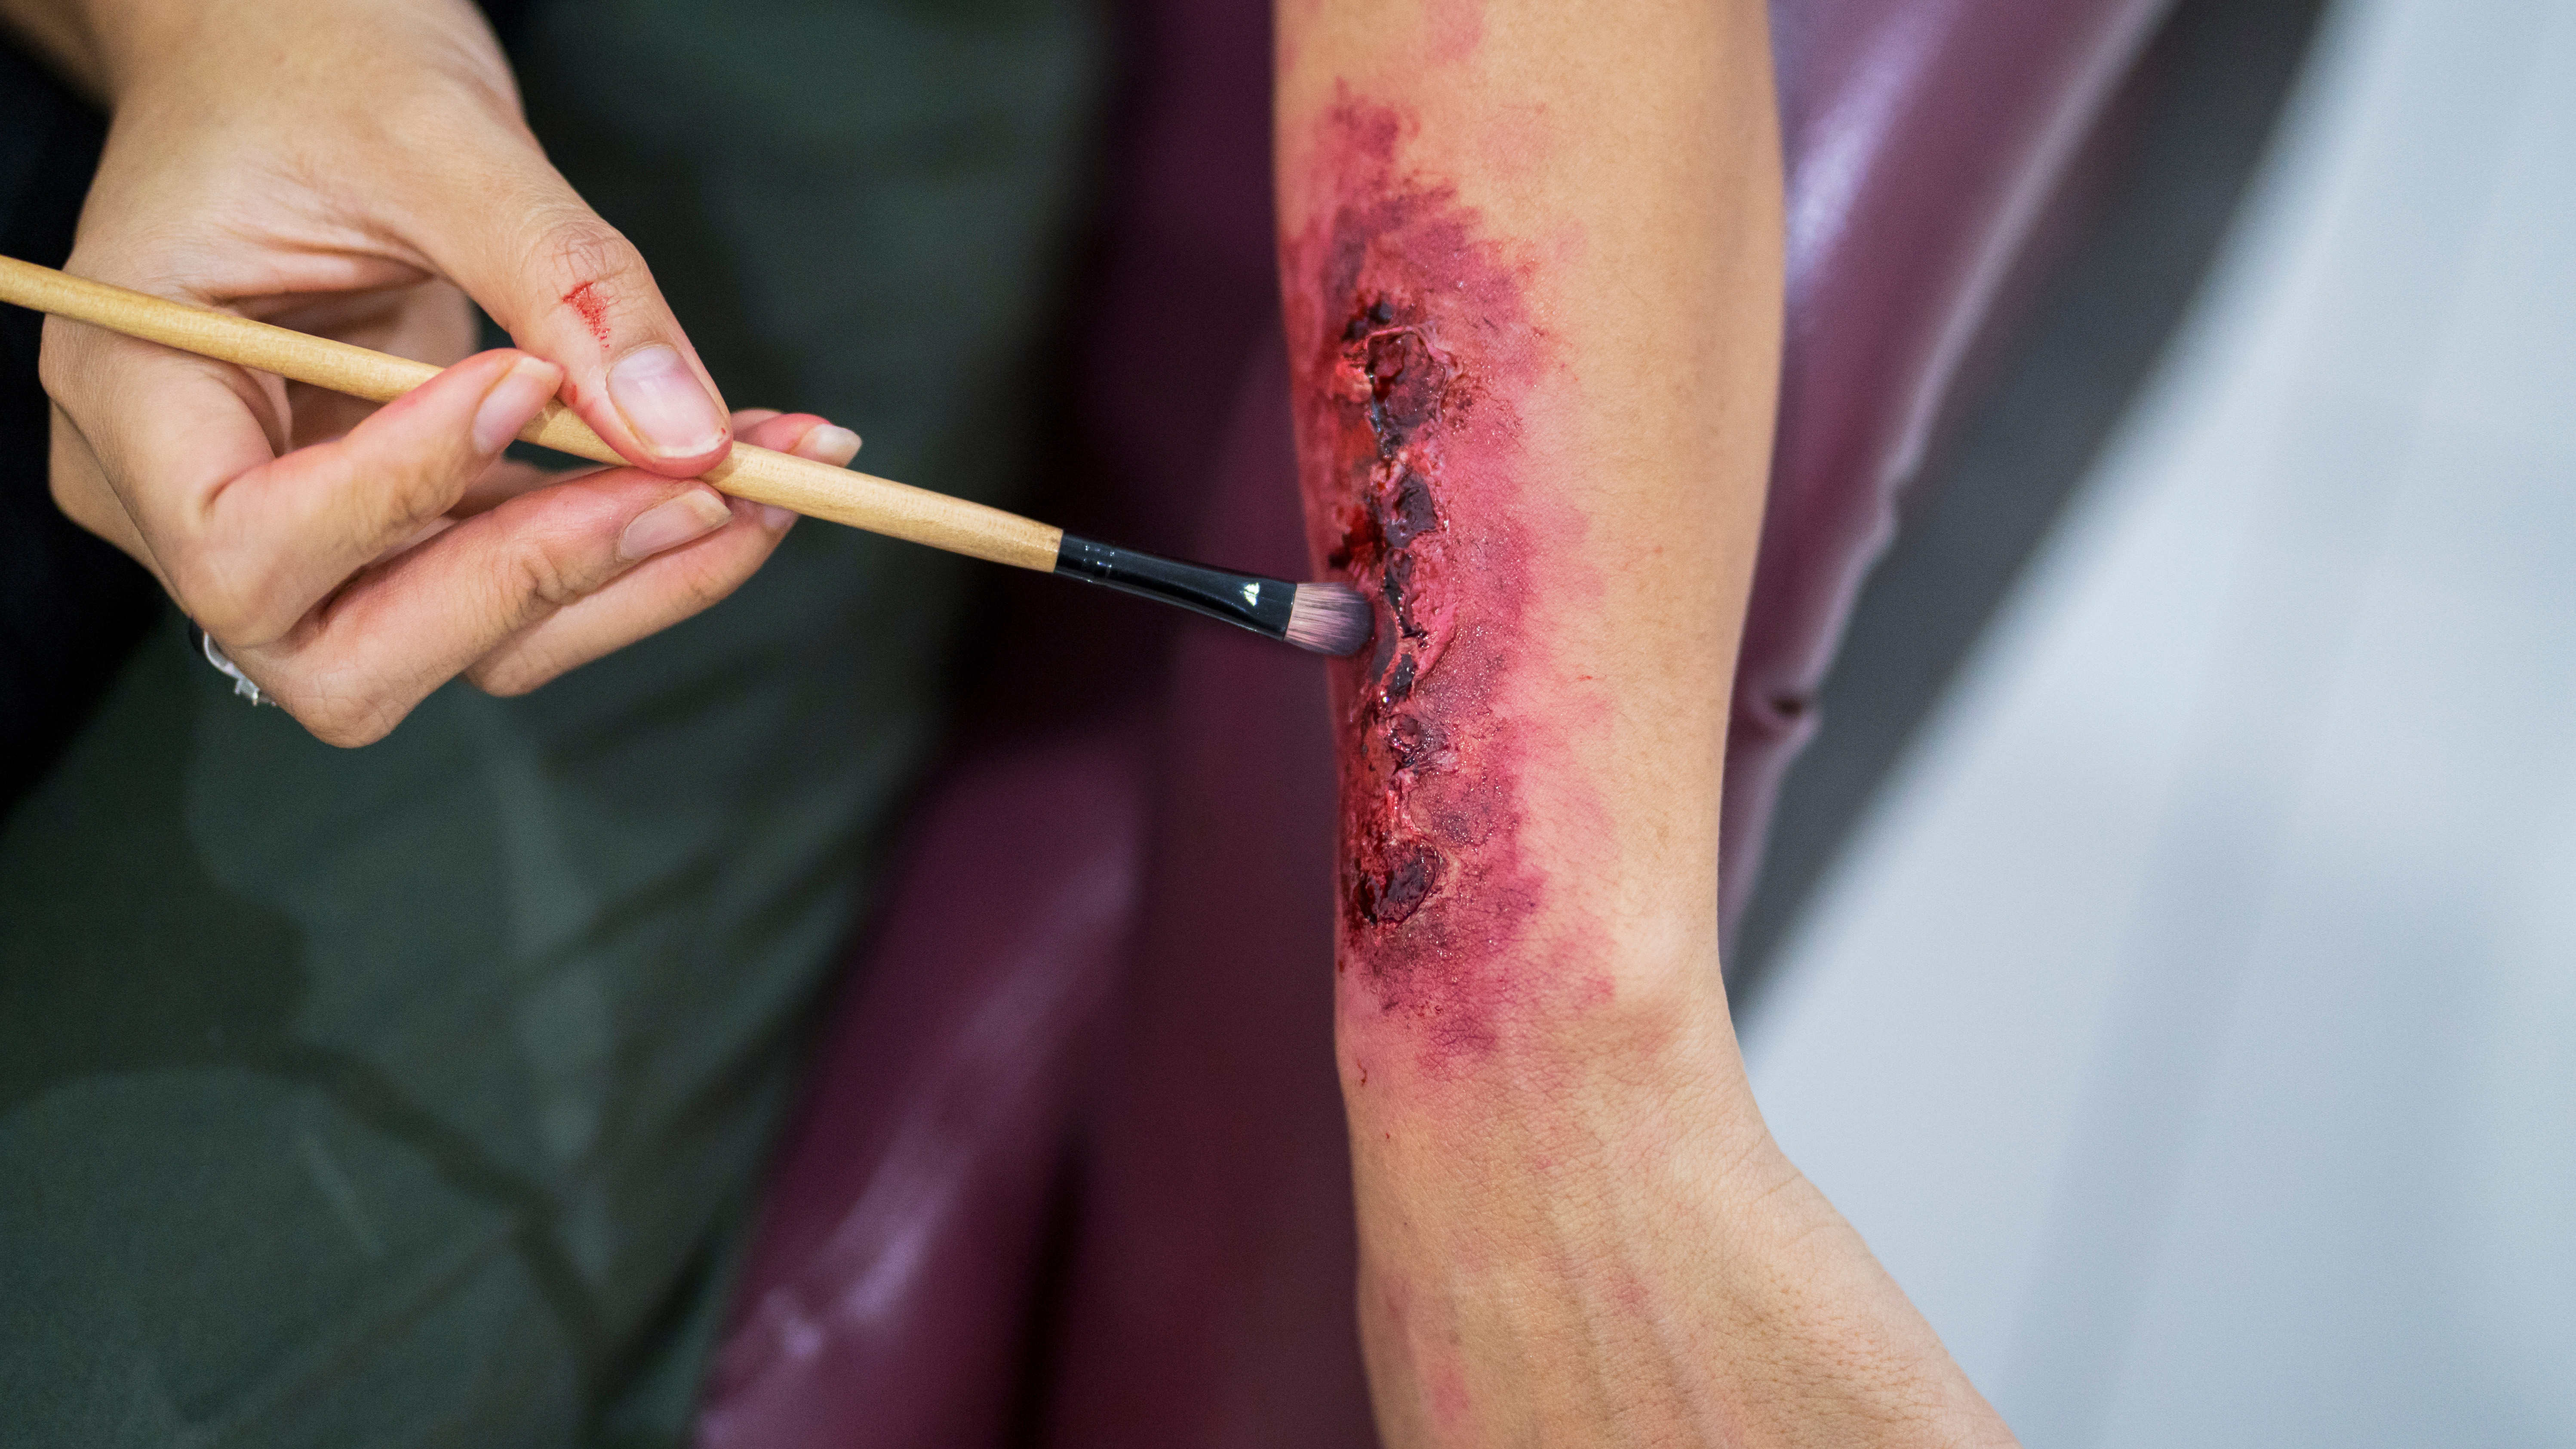 A fake wound being painted onto an arm